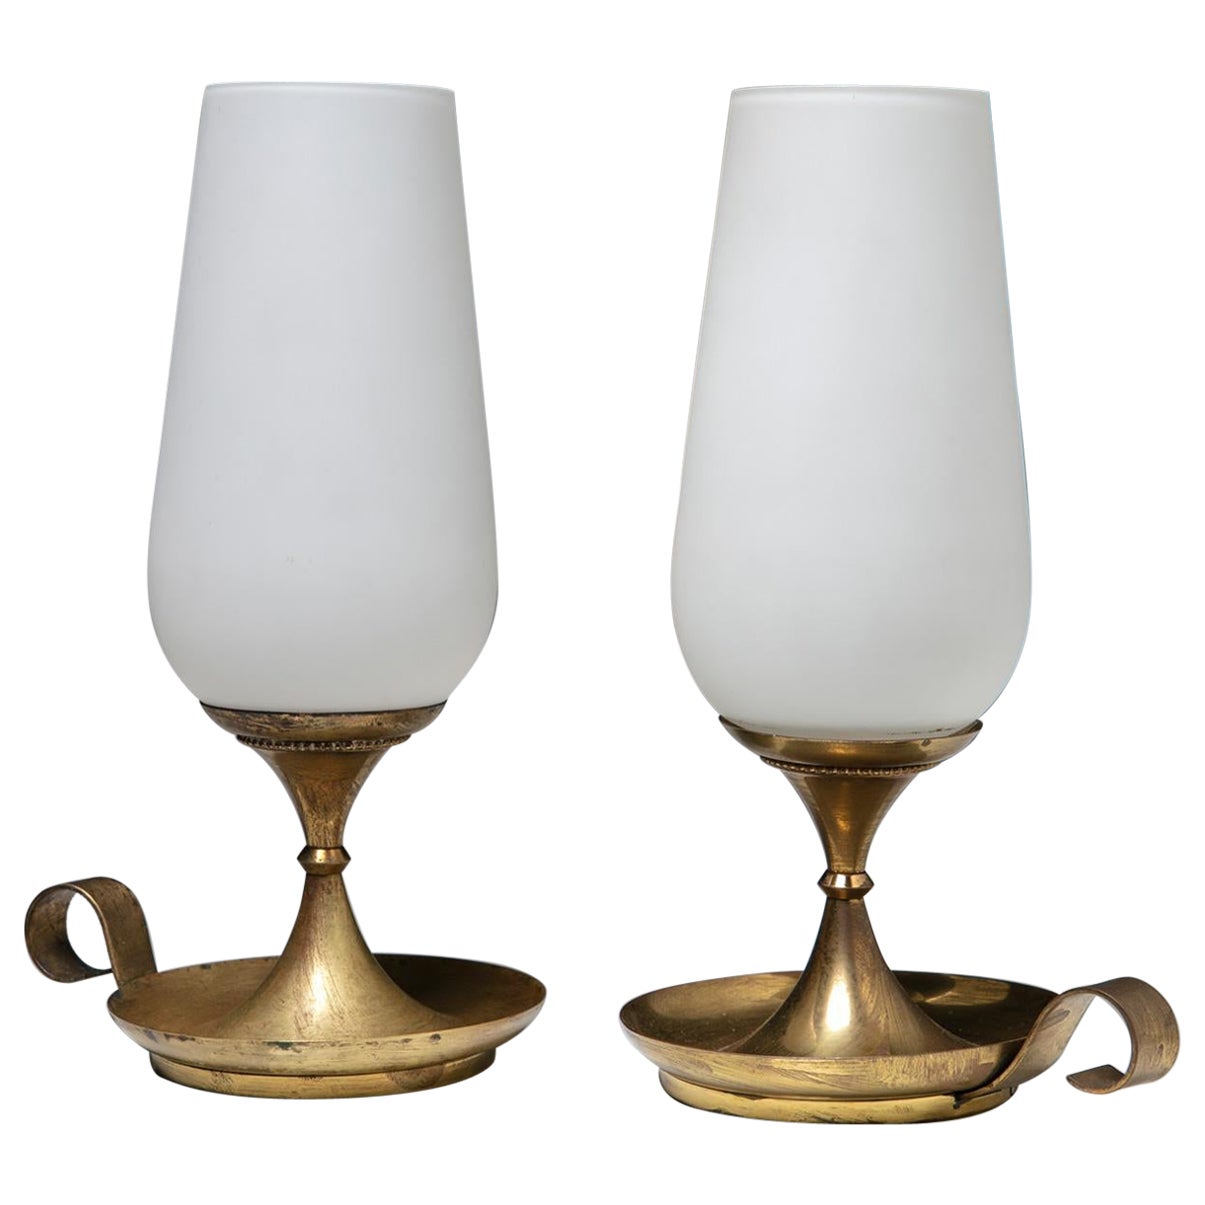 Set of Two Bedside Table Lamps by Stilnovo, Italy, 1950s